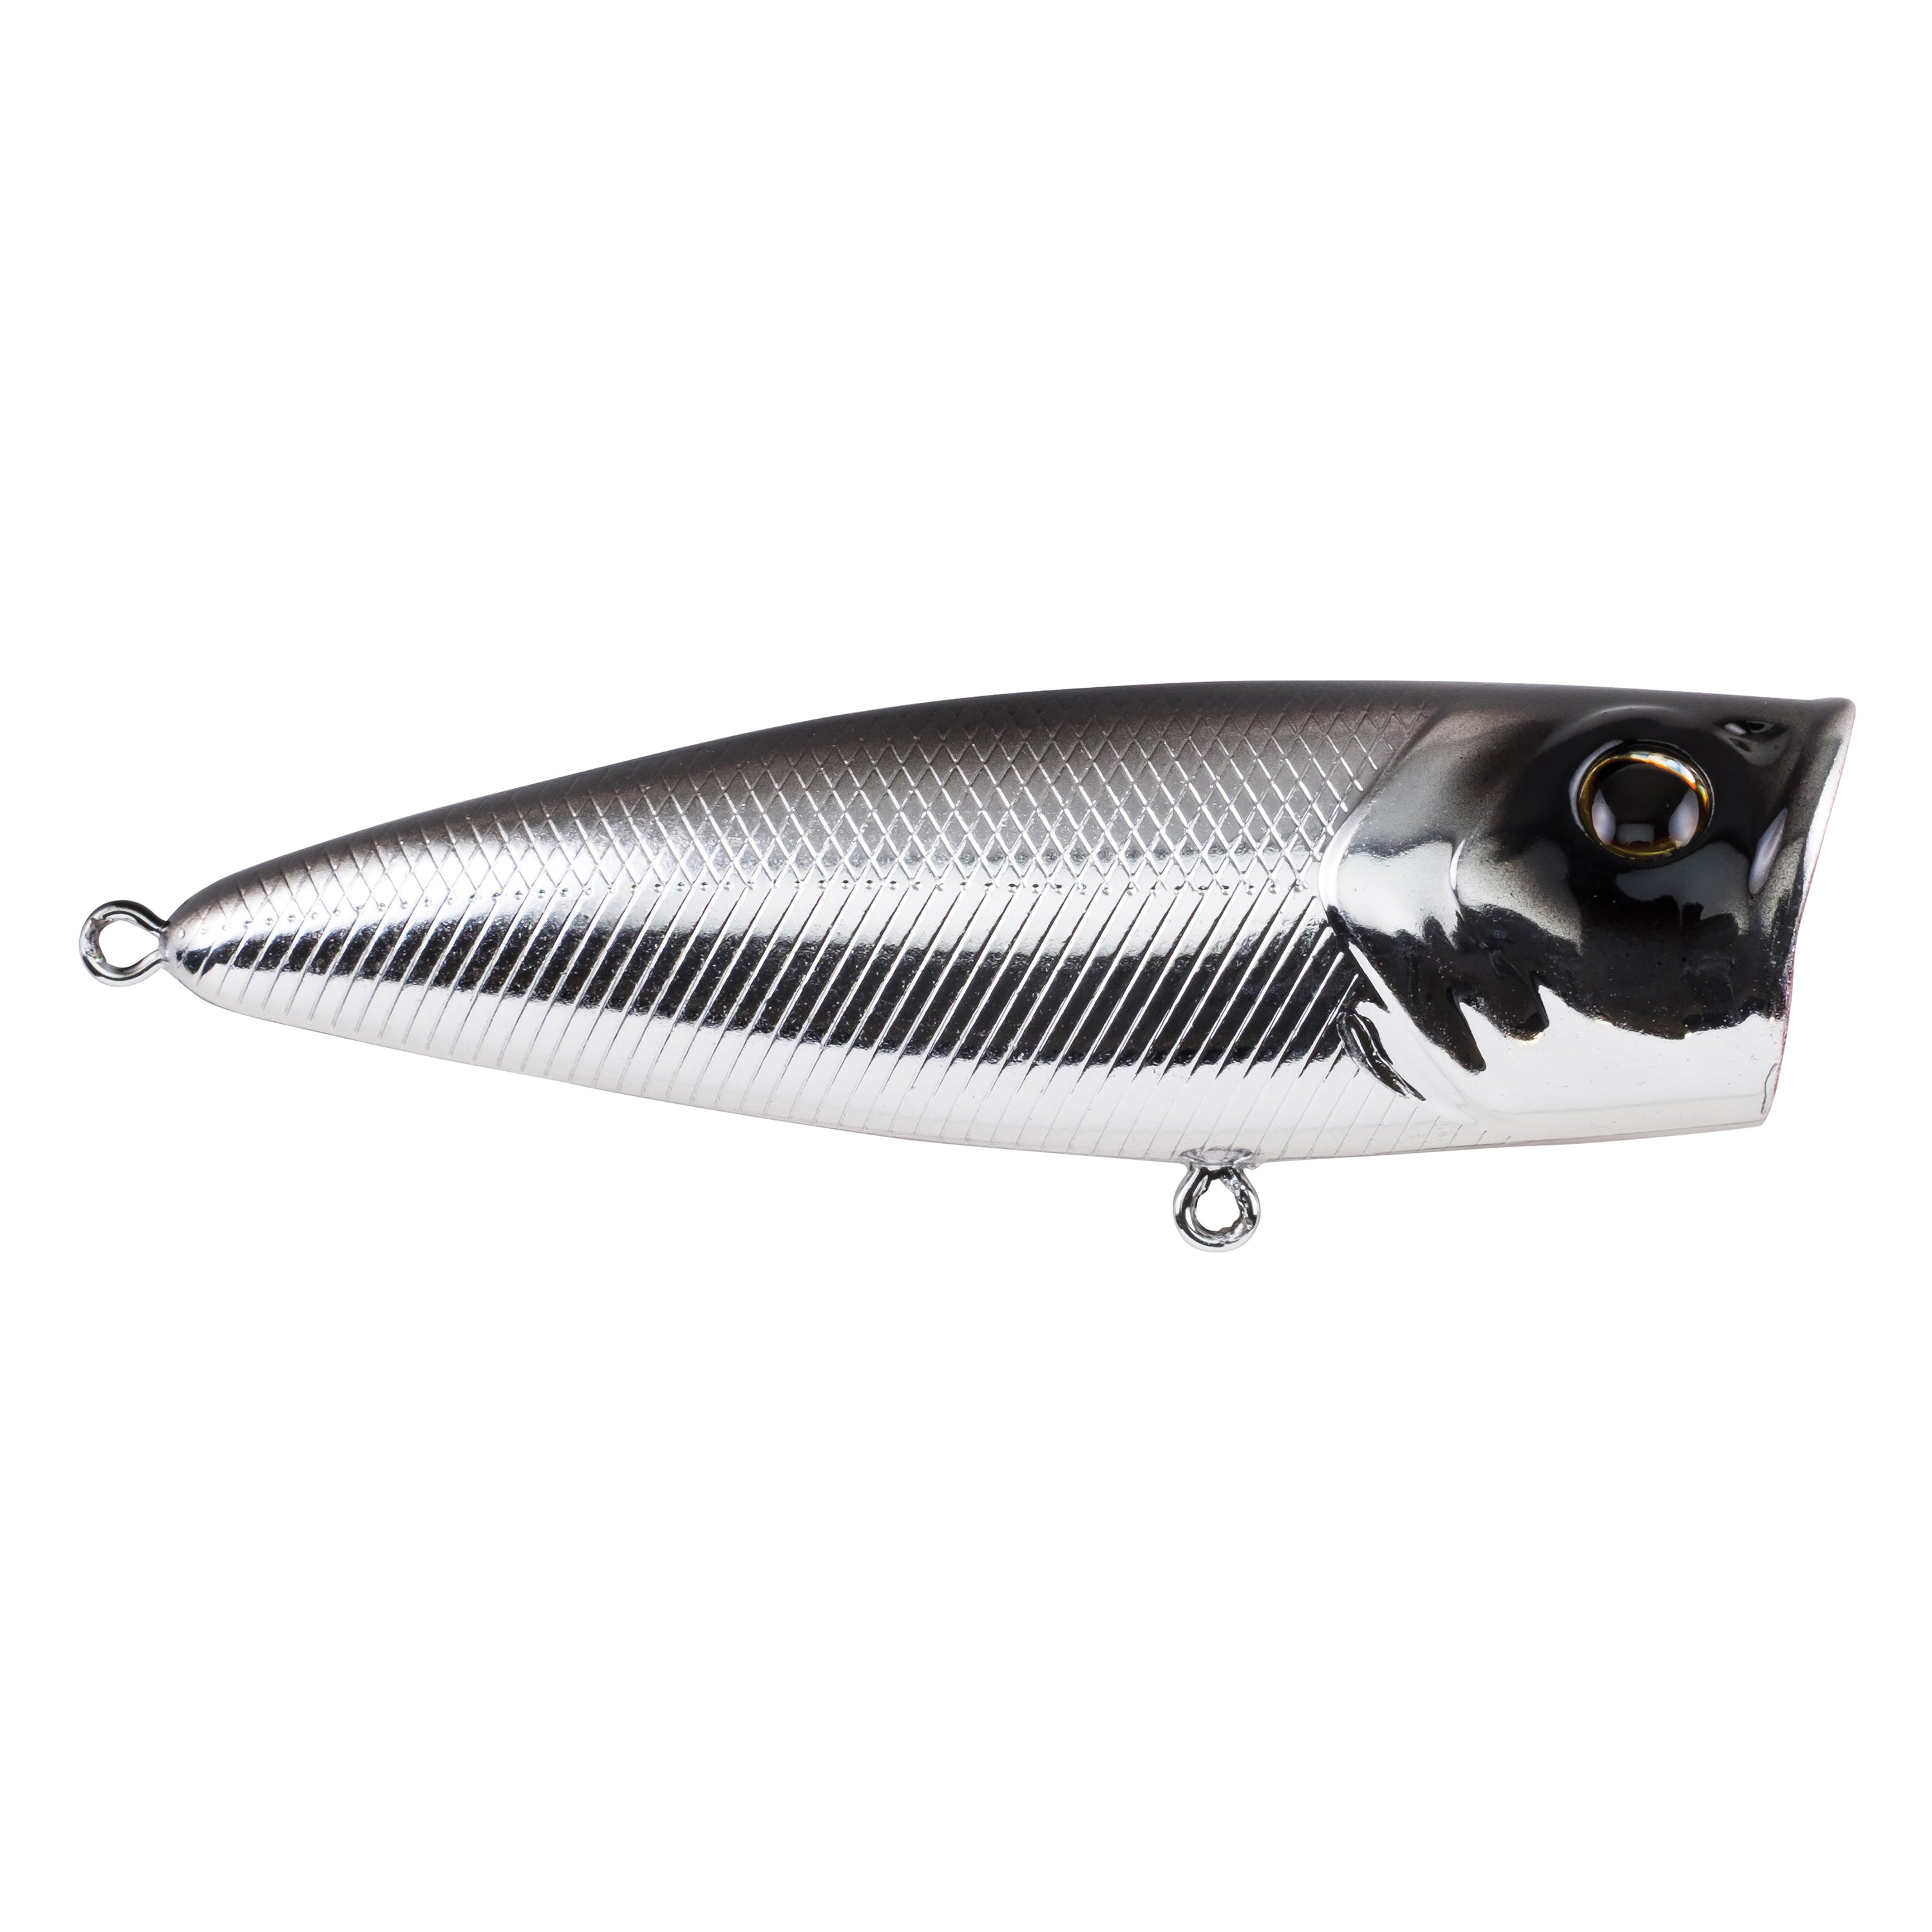  Berkley Bullet Pop Topwater Fishing Lure, Baby Bass, 1/2 oz,  80mm Topwater, Tail Weighted Design Tuned for Maximum Casting Distance,  Equipped with Fusion19 Hook : Sports & Outdoors